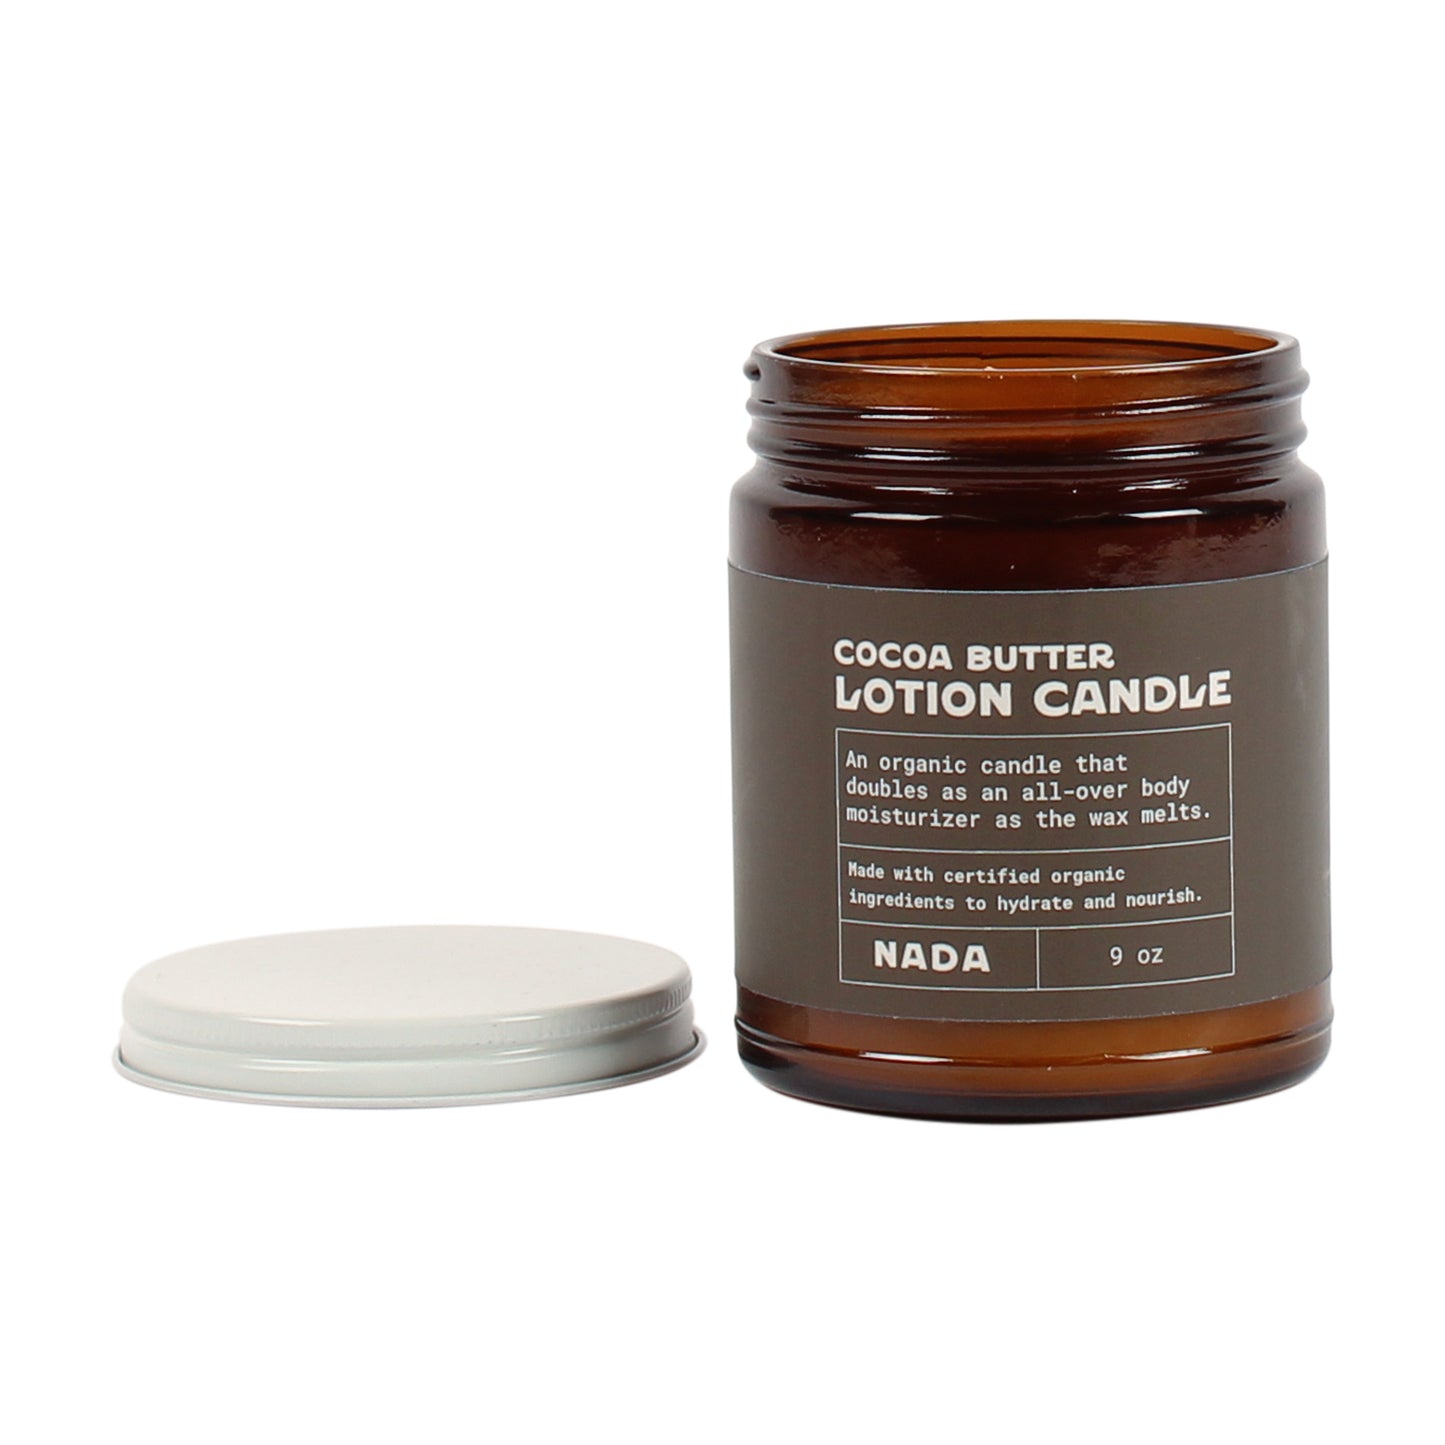 Lotion Candle